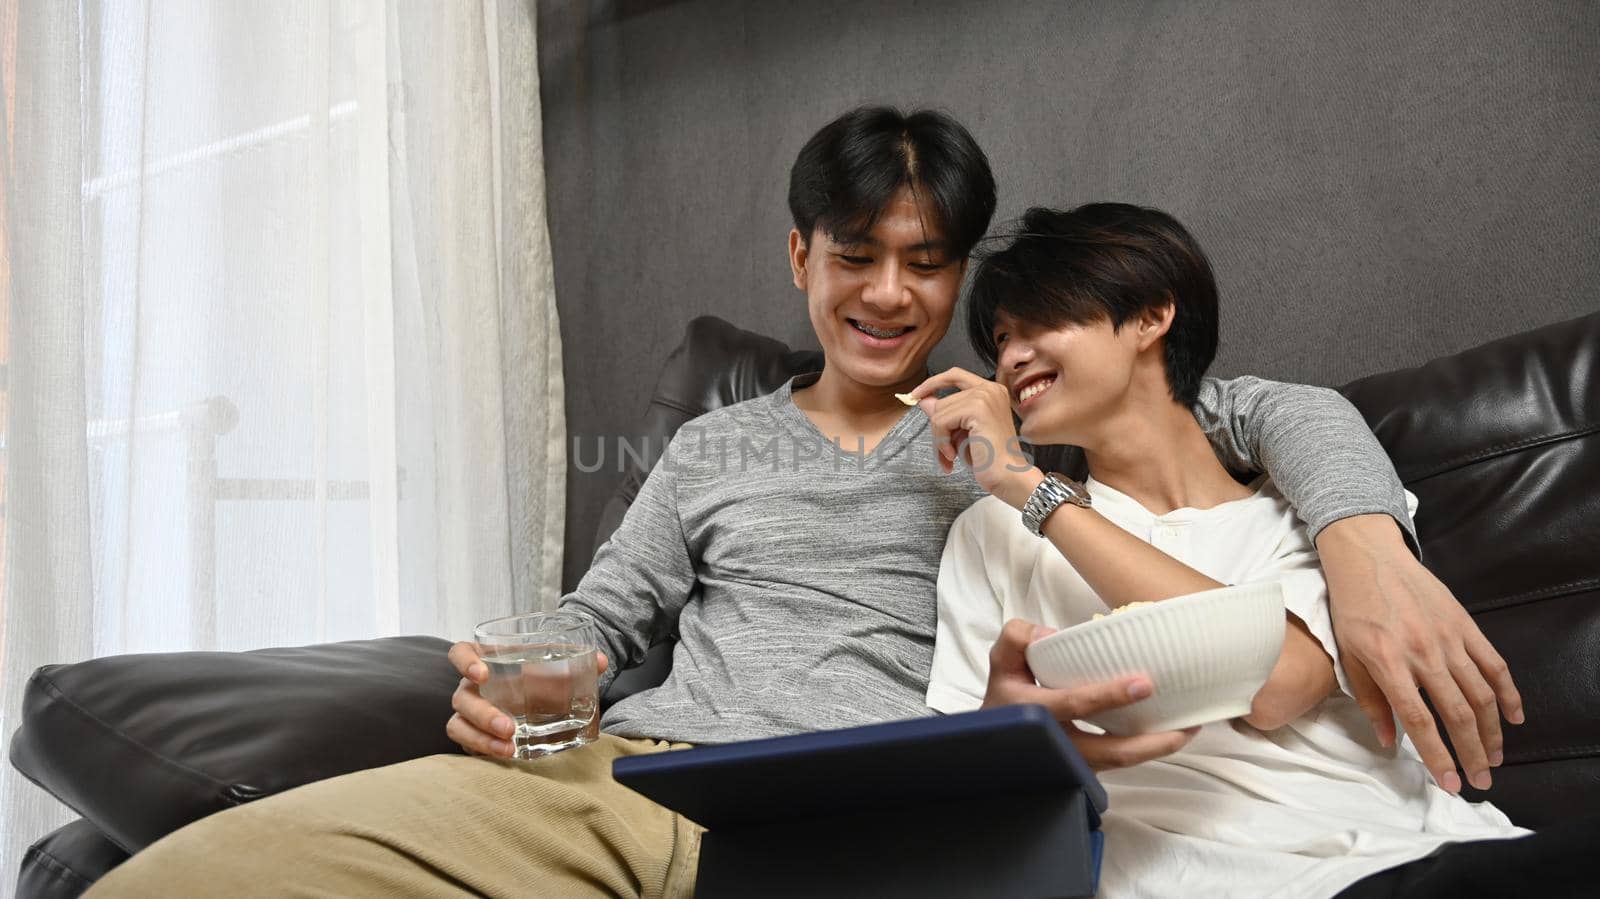 Loving same sex male couple using digital tablet together on sofa. Homosexual relationships and alternative love lifestyle concept by prathanchorruangsak